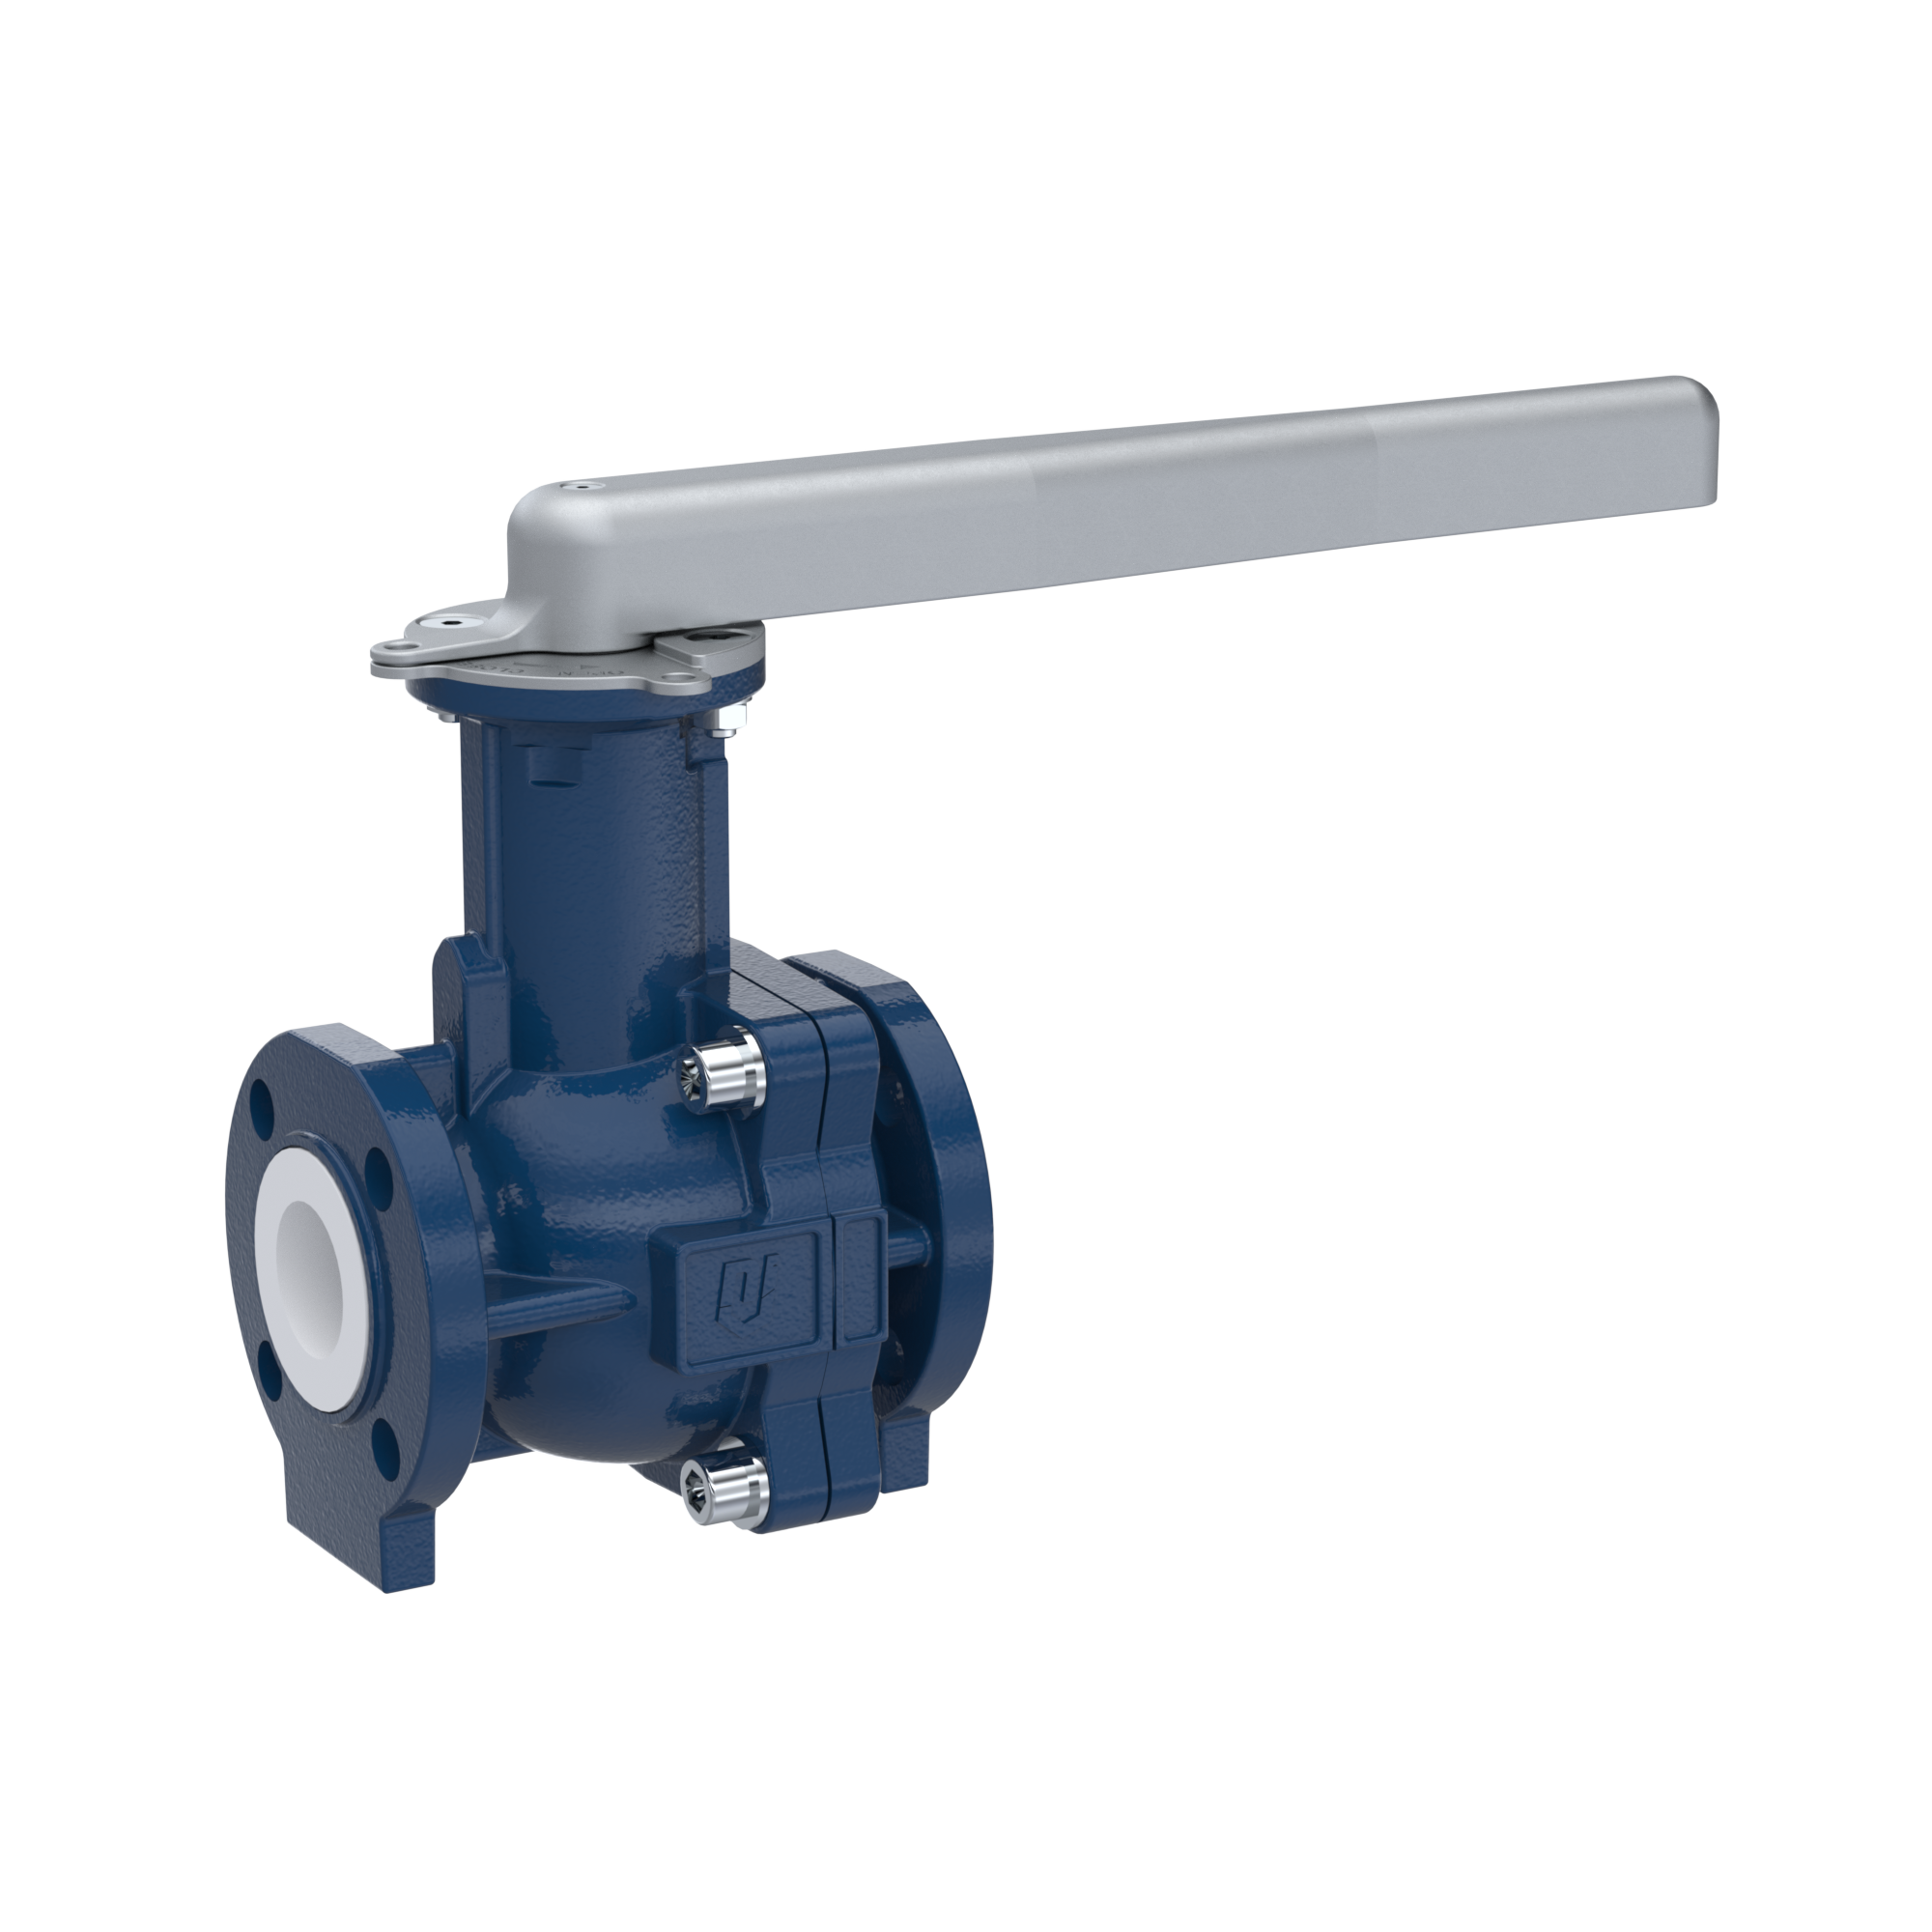 PFA-flange ball valve FK13 DN40 - 1 1/2" inch ANSI 150 made of spheroidal graphite cast iron with lever hand